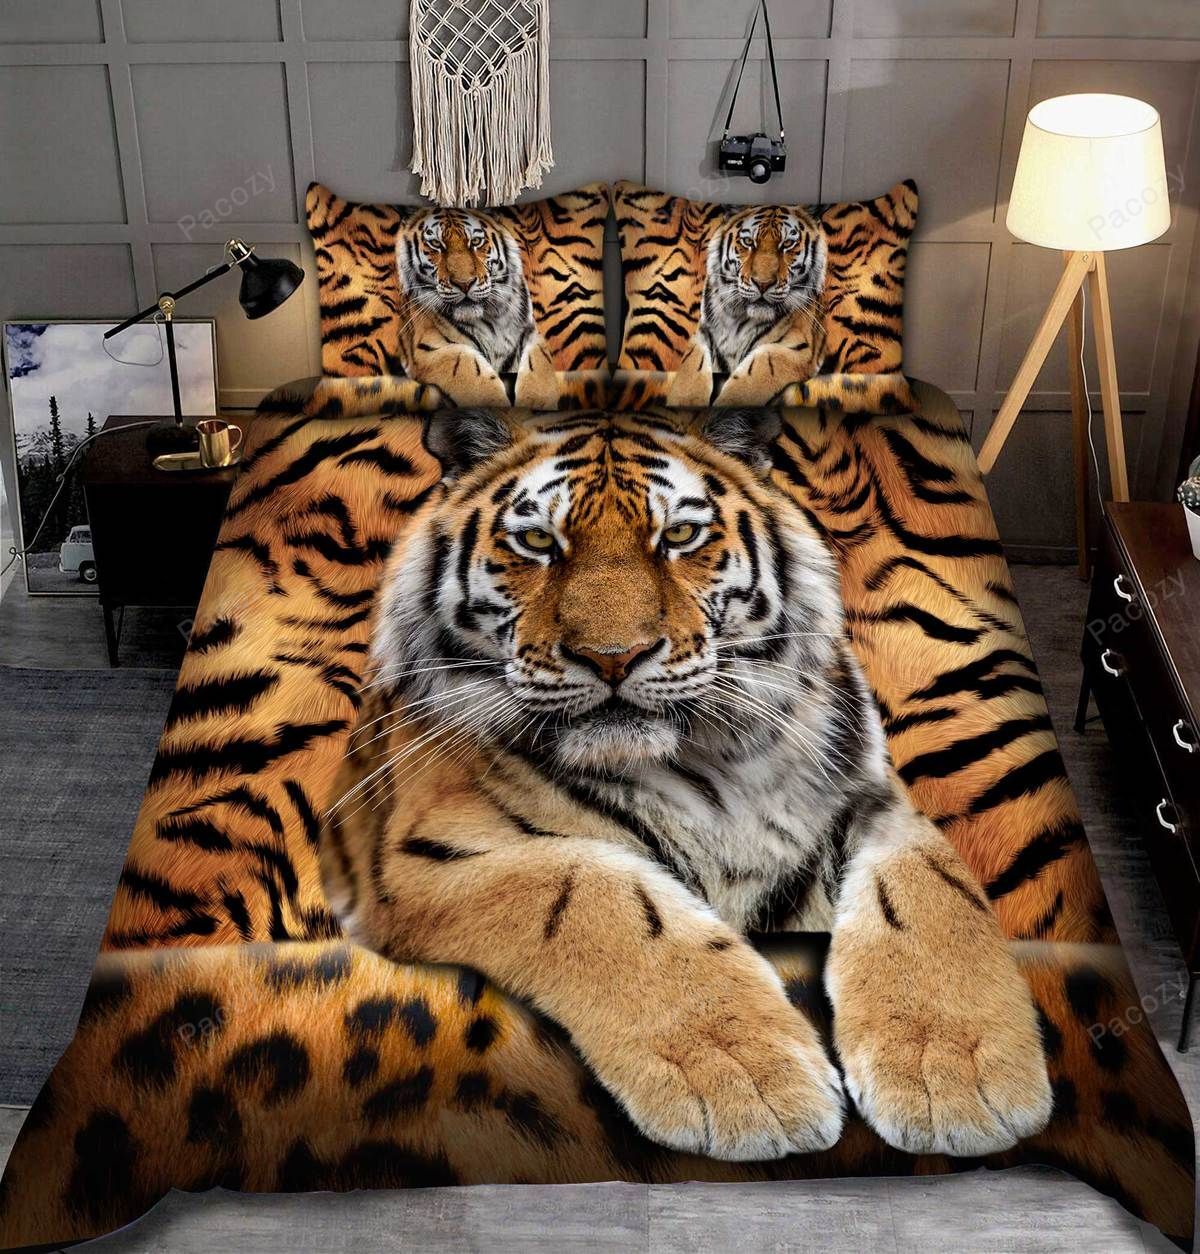 Cool tiger all over printed bedding set